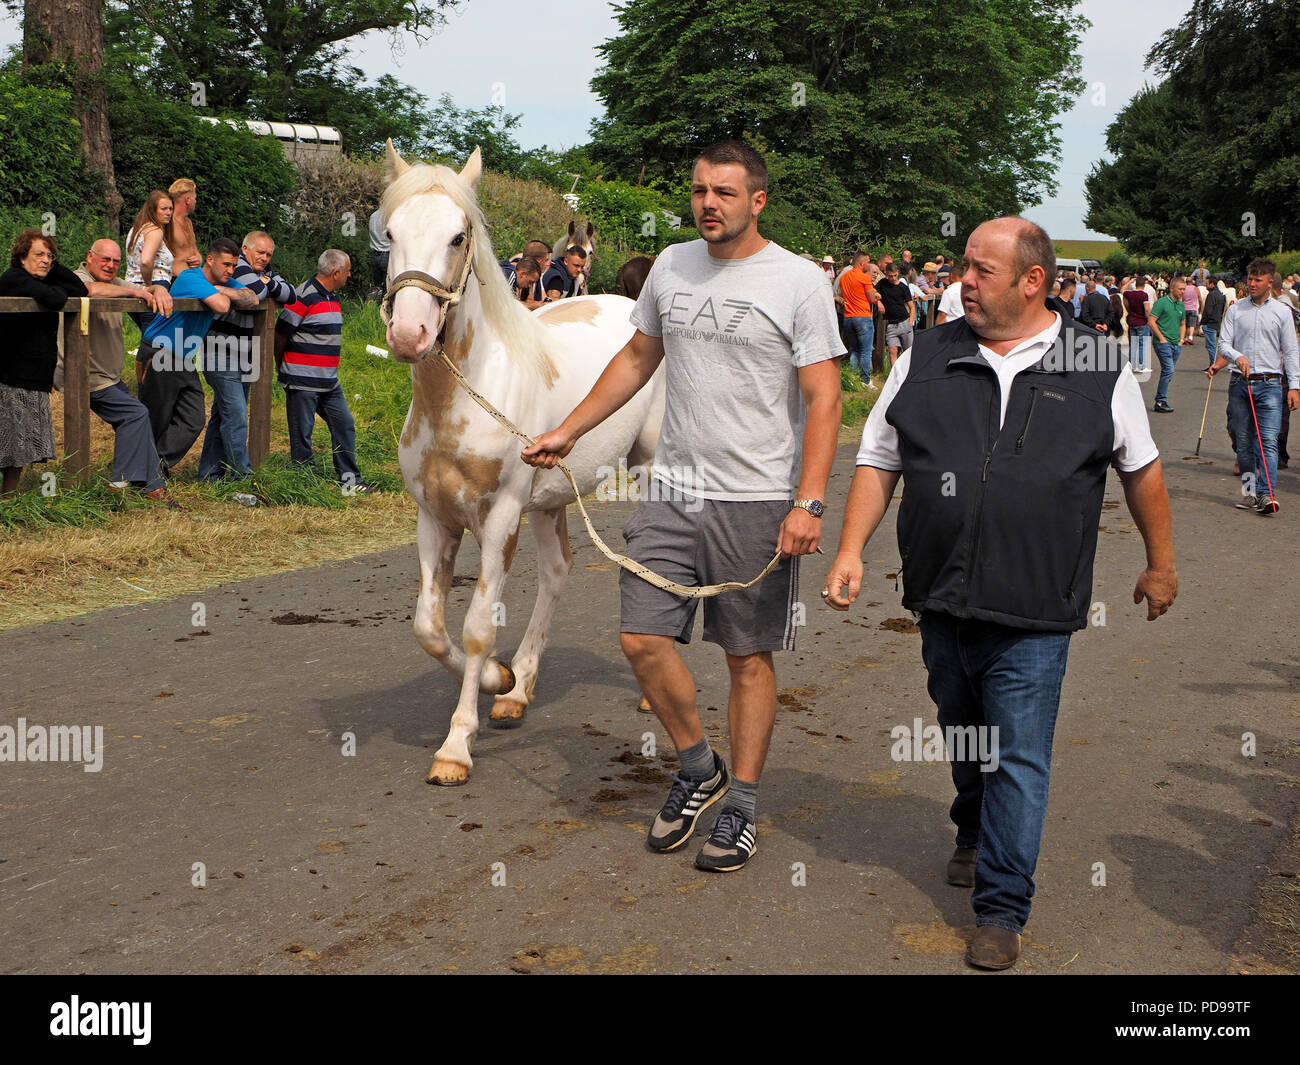 male in shorts leads white horse along Fair Hill roadway amid crowds at the annual Appleby Horse fair at Appleby in Westmorland Cumbria England Stock Photo